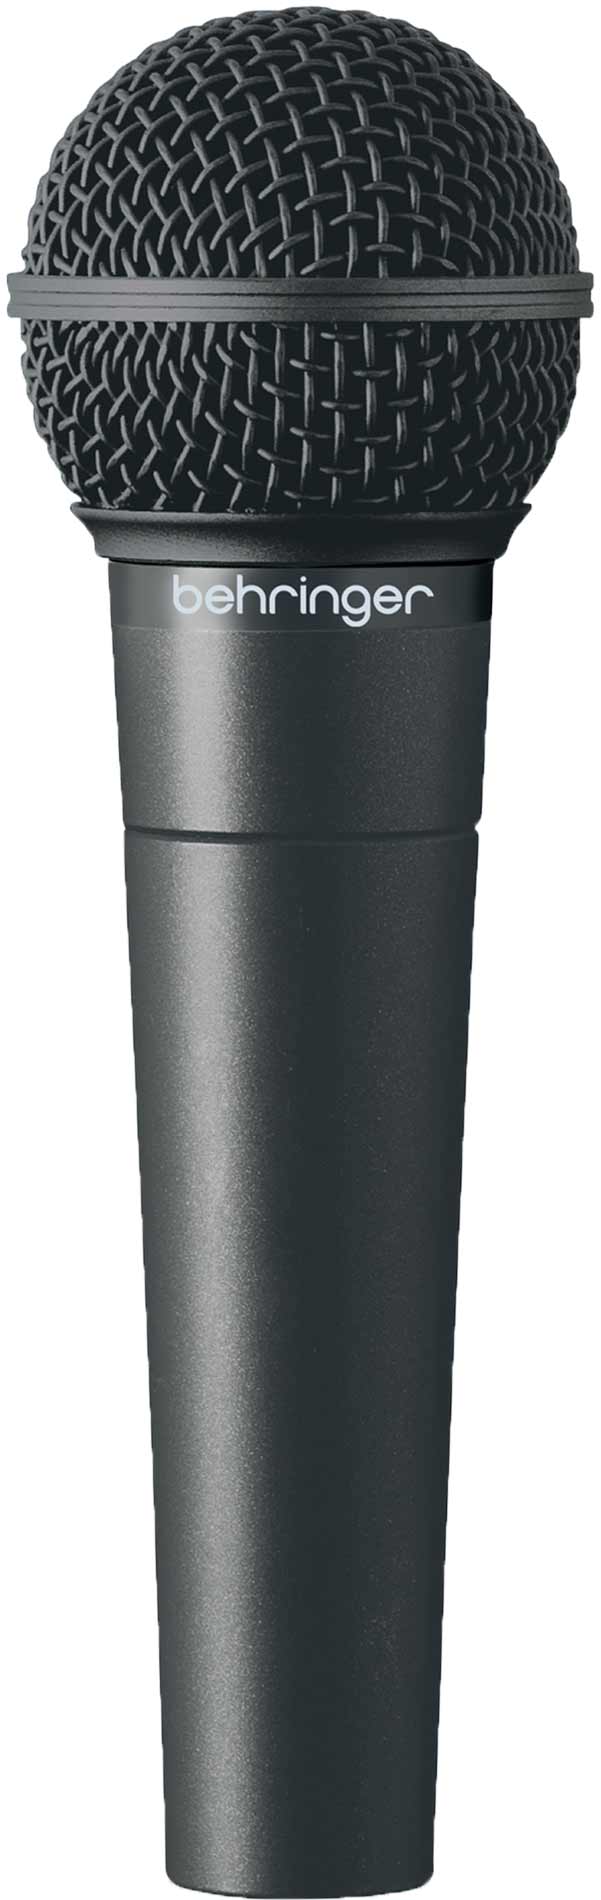 View larger image of Behringer XM8500 Ultravoice Dynamic Cardioid Vocal Microphone